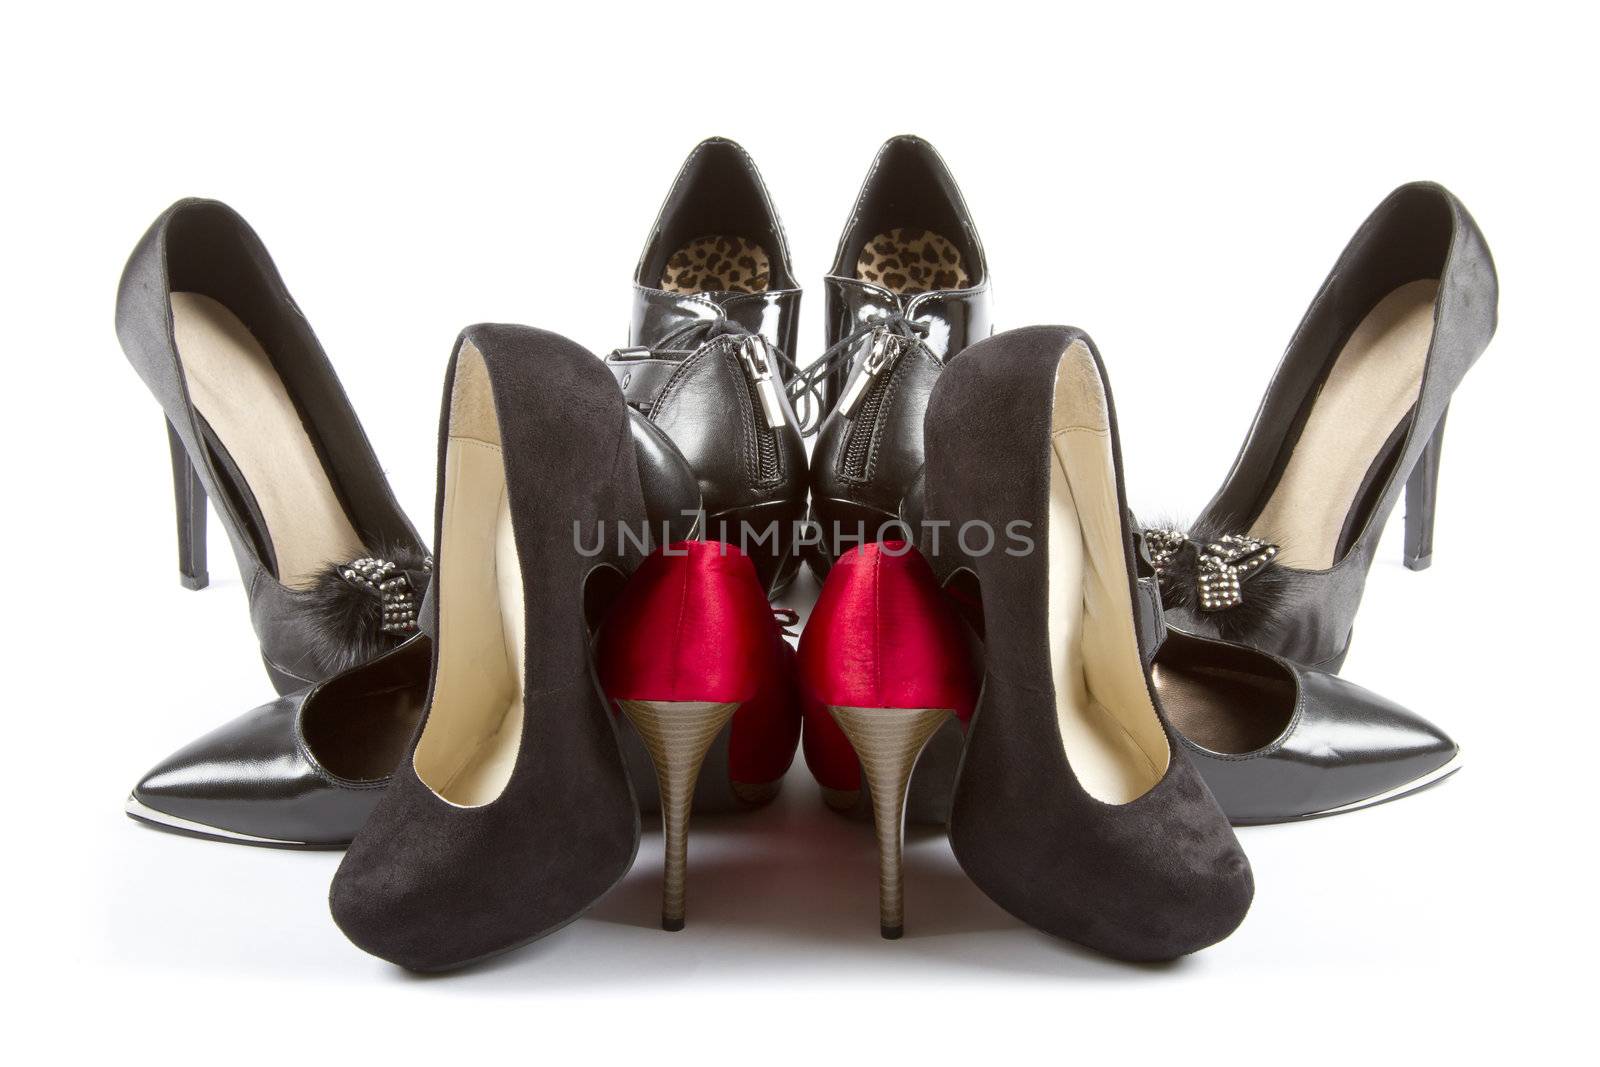 Several pairs of high heels in red and black